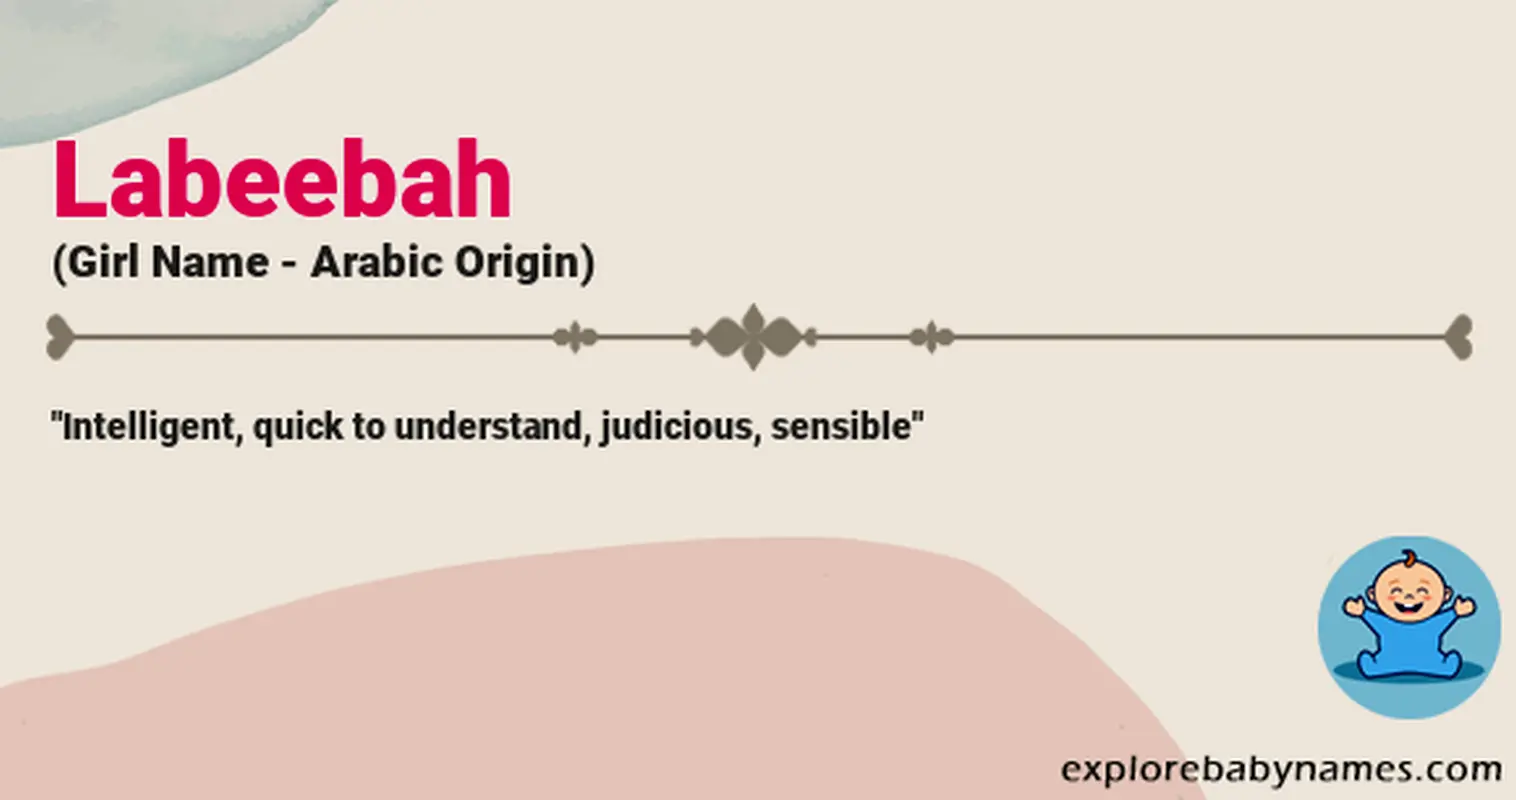 Meaning of Labeebah